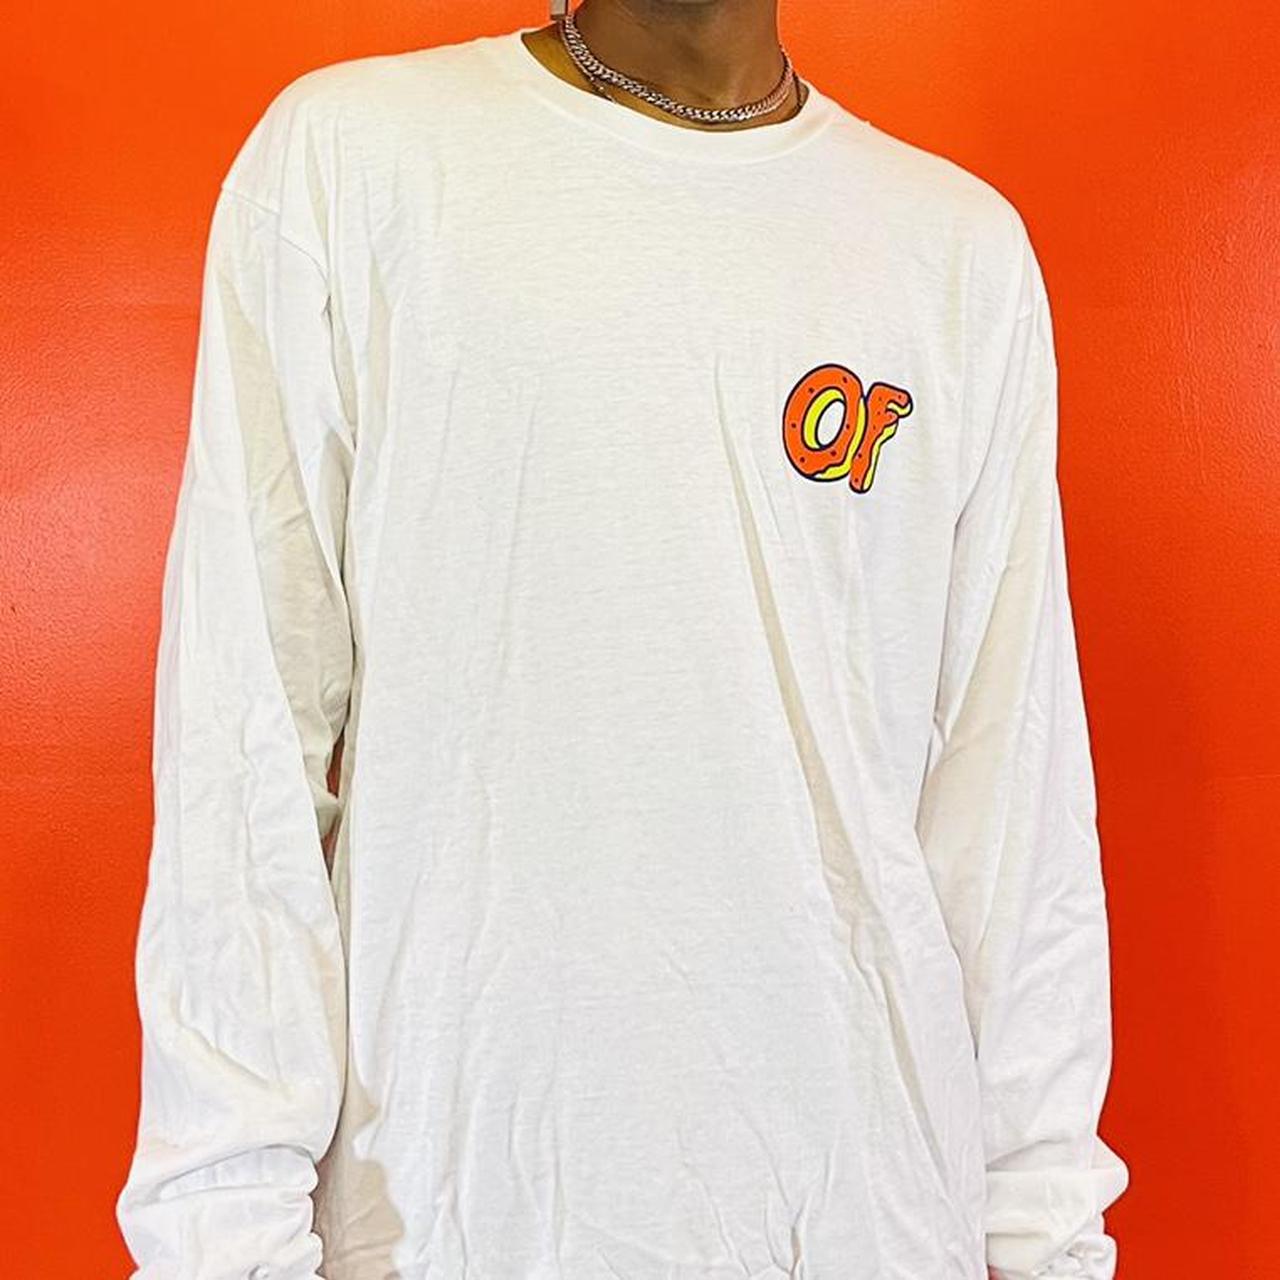 Product Image 1 - 🍩ODD FUTURE 100K Tee🍩

⚡️Rare
⚡️Exclusive
⚡️Clean

⏺It’s extremely